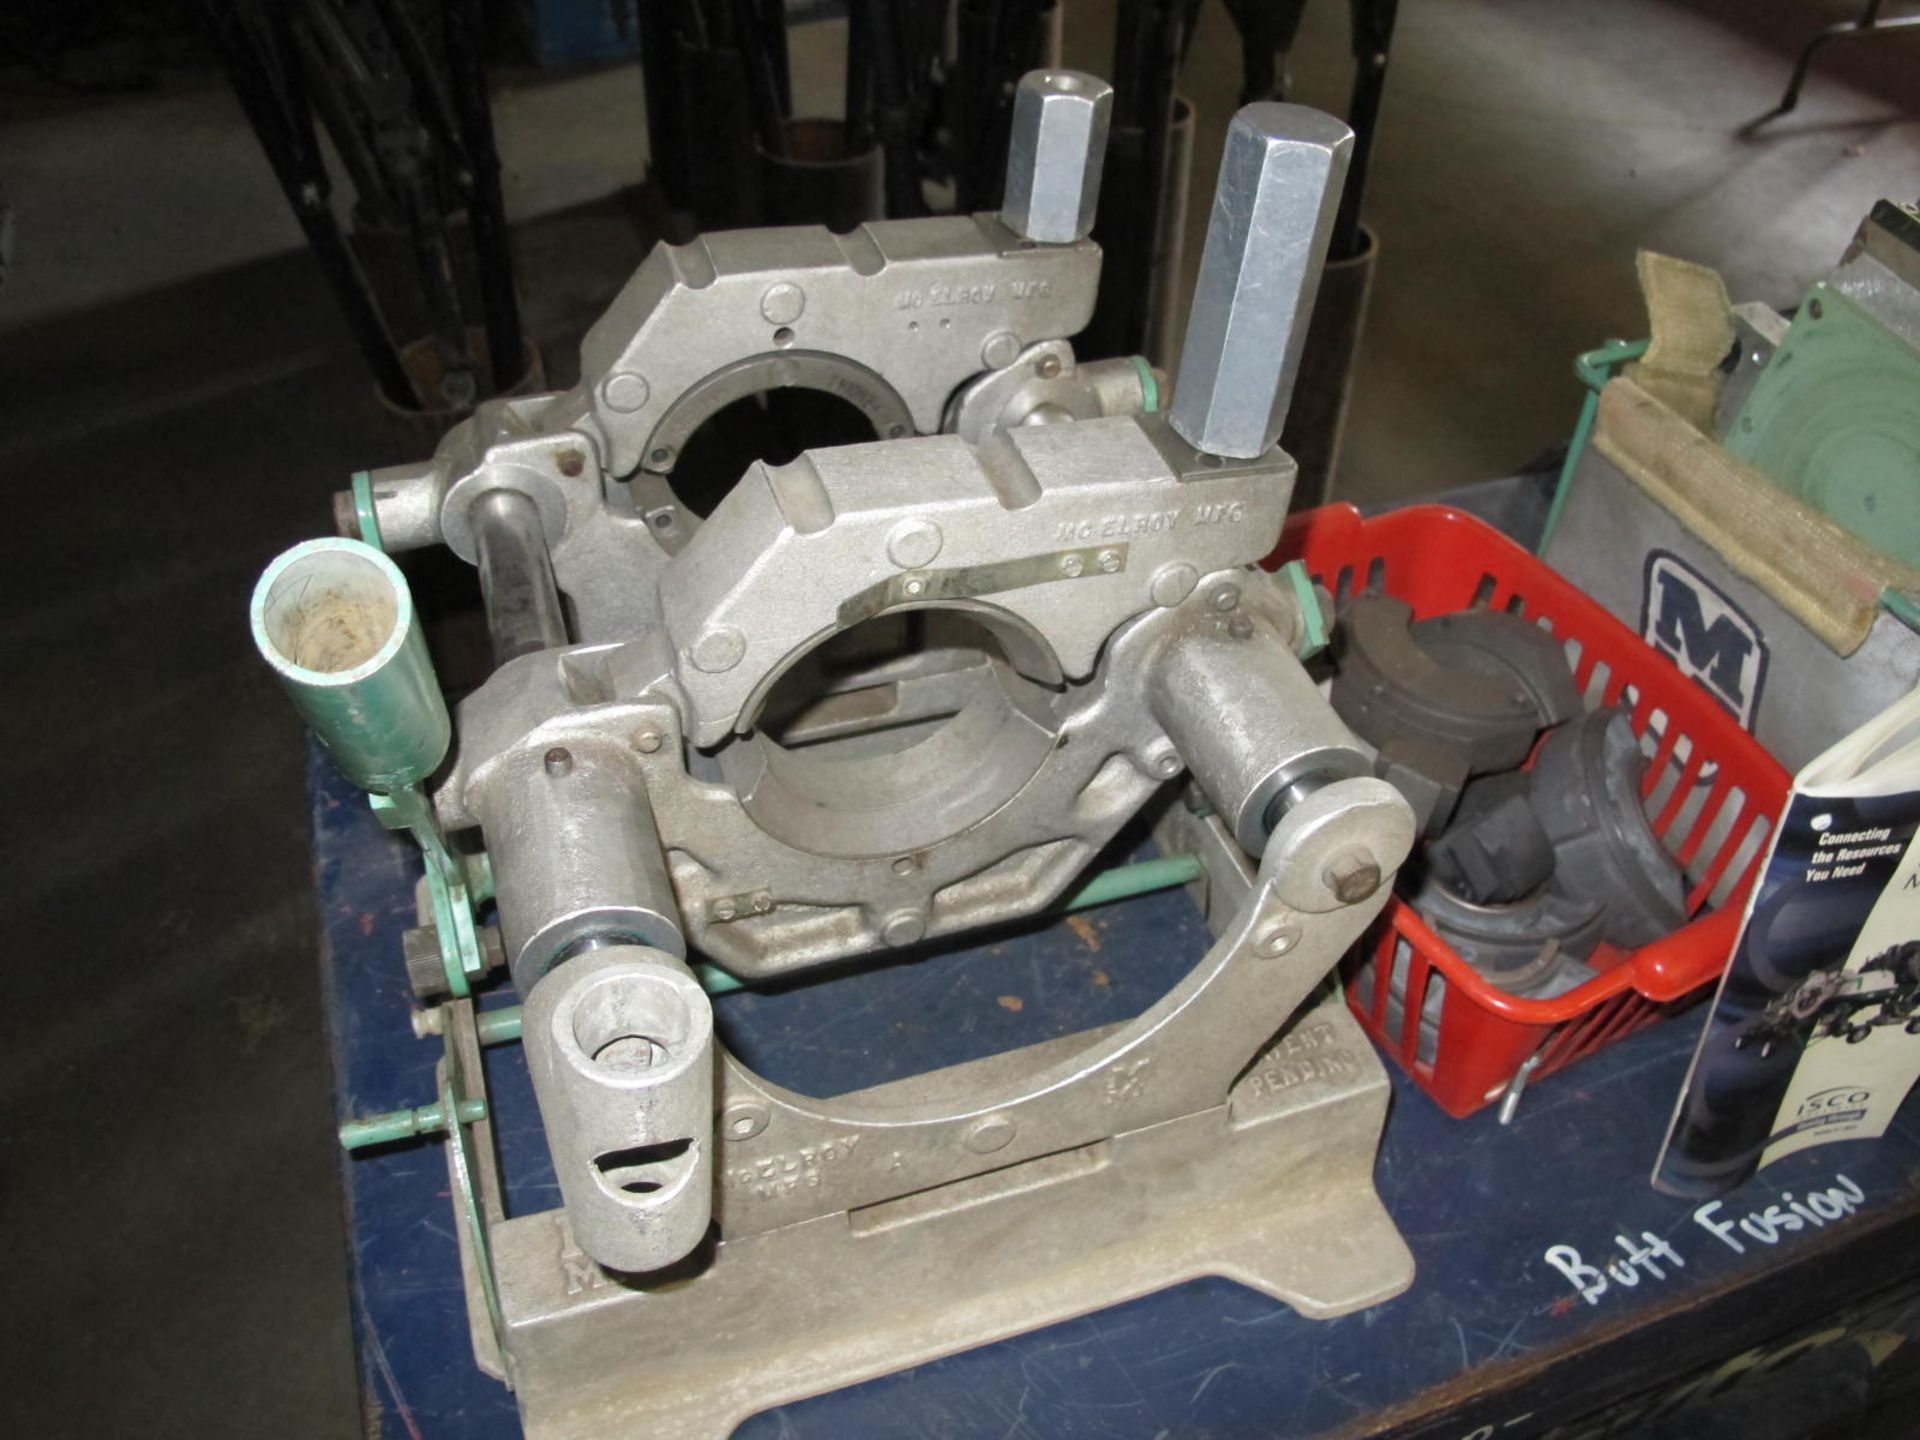 McElroy HDPE Manual Butt Fusion System, Model No. 42001, Serial No. 453070-02, Electric Facer, - Image 2 of 3